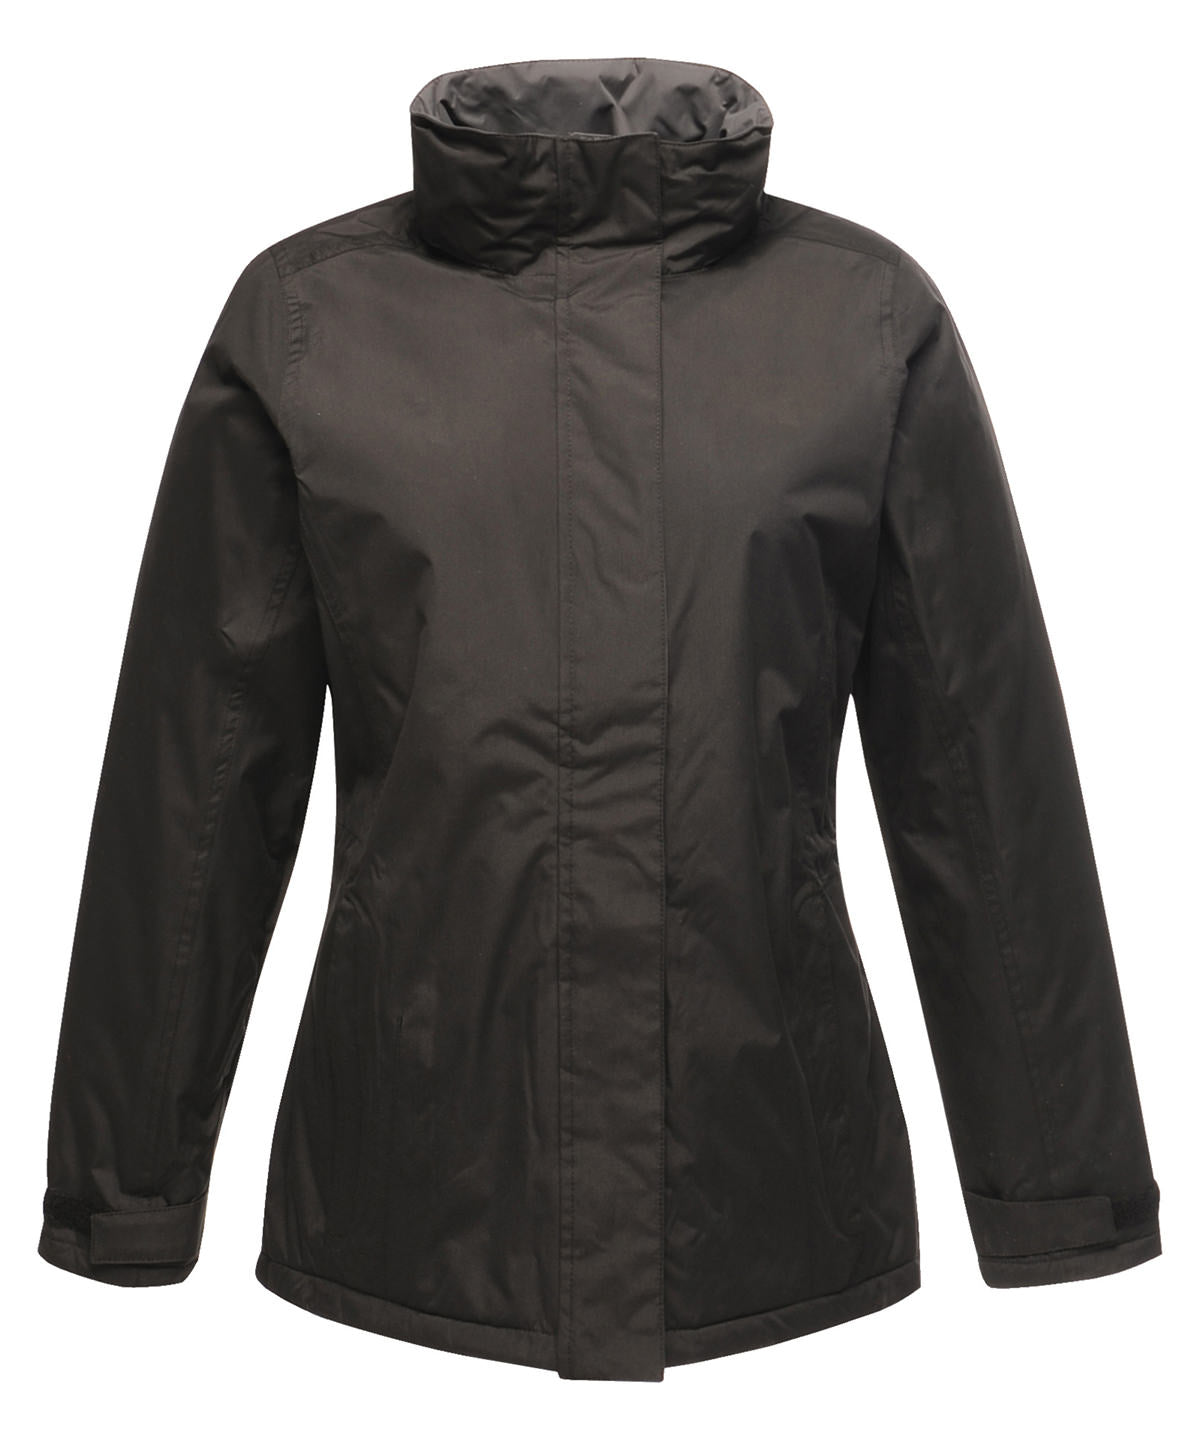 Women's Beauford Insulated Jacket